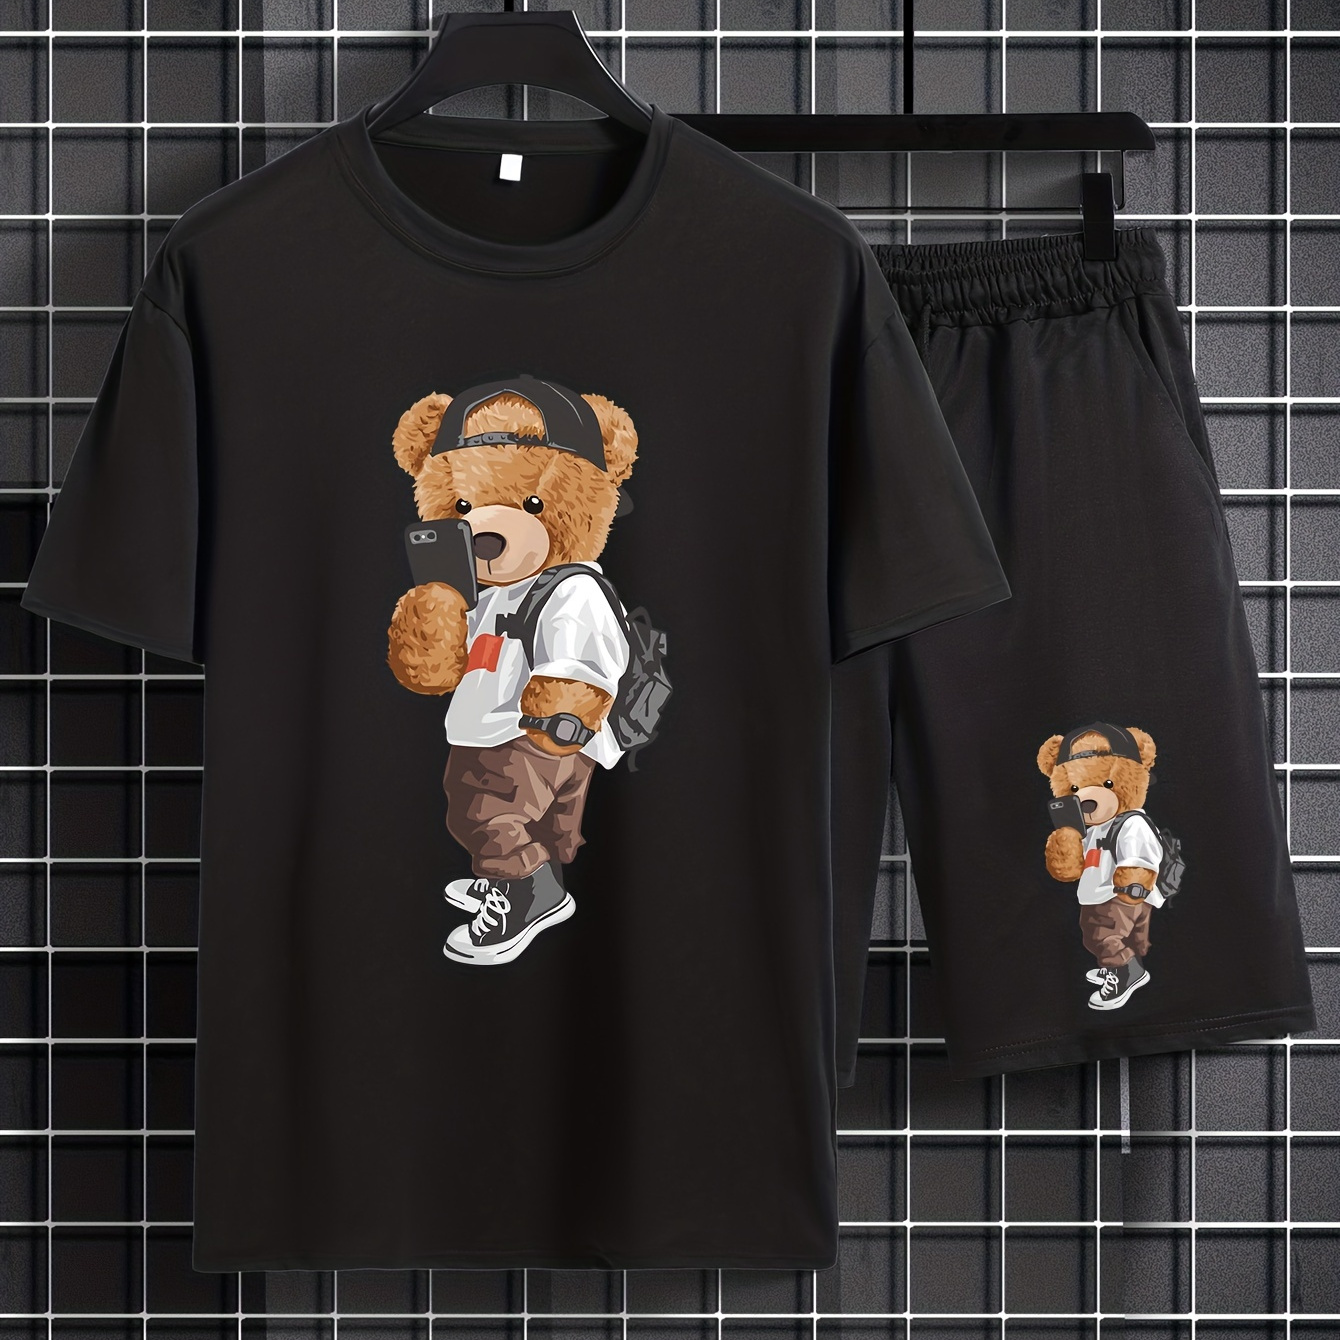 

Plus Size Men's Cartoon Cool Bear With Phone Graphic Print T-shirt & Shorts Set For Sports/workout/outdoor, Summer Trendy Oversized 2pcs Tracksuit For Summer, Men's Clothing